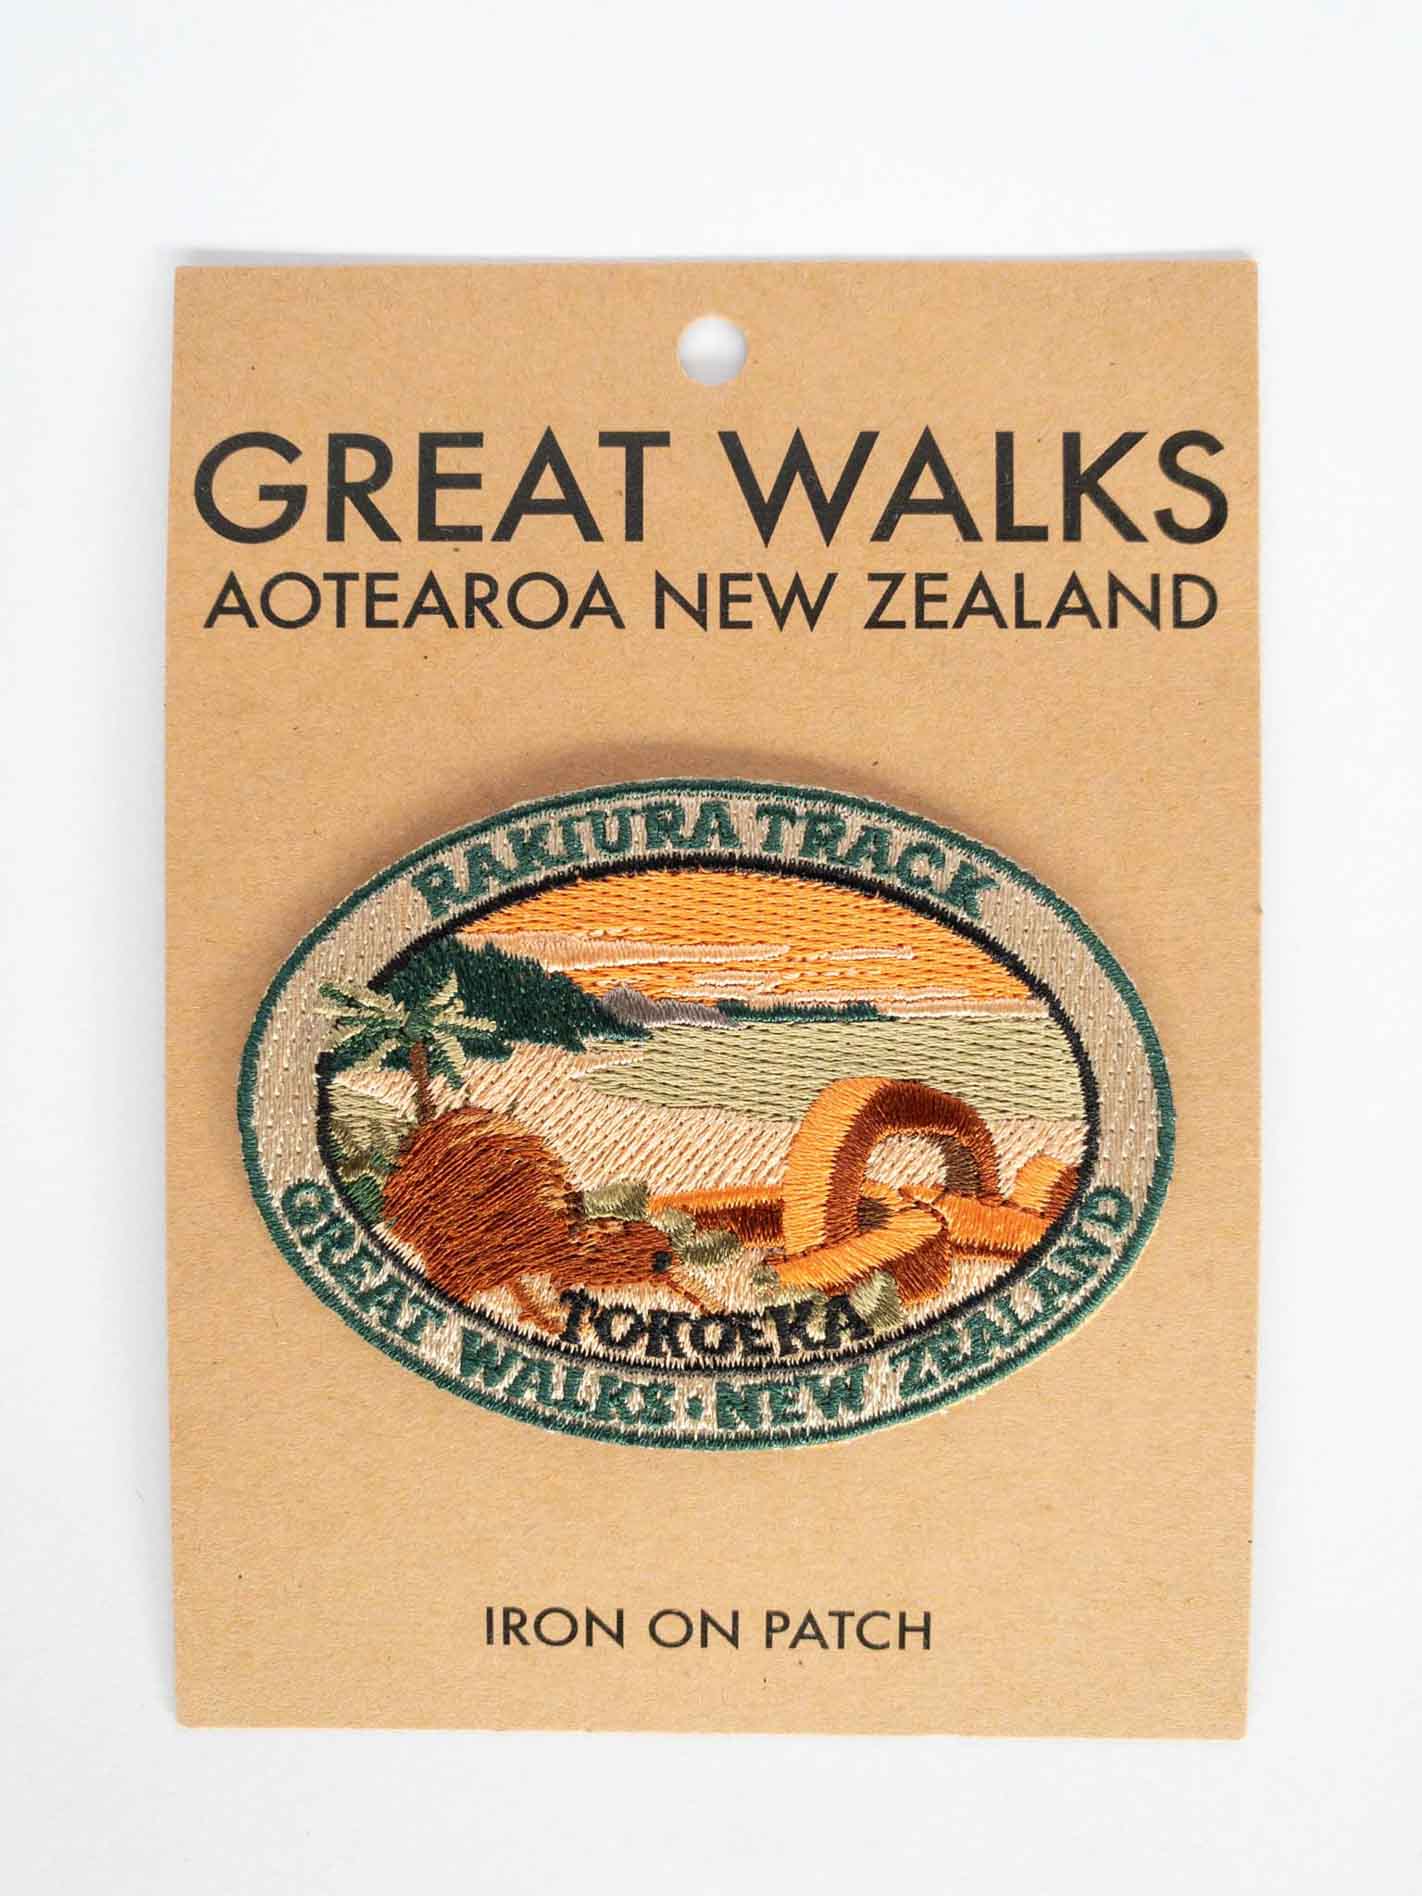 Oval, embroidered Rakiura Track patch, with a brown kiwi, orange sky, and a chain link sculpture, on brown kraft backing card.